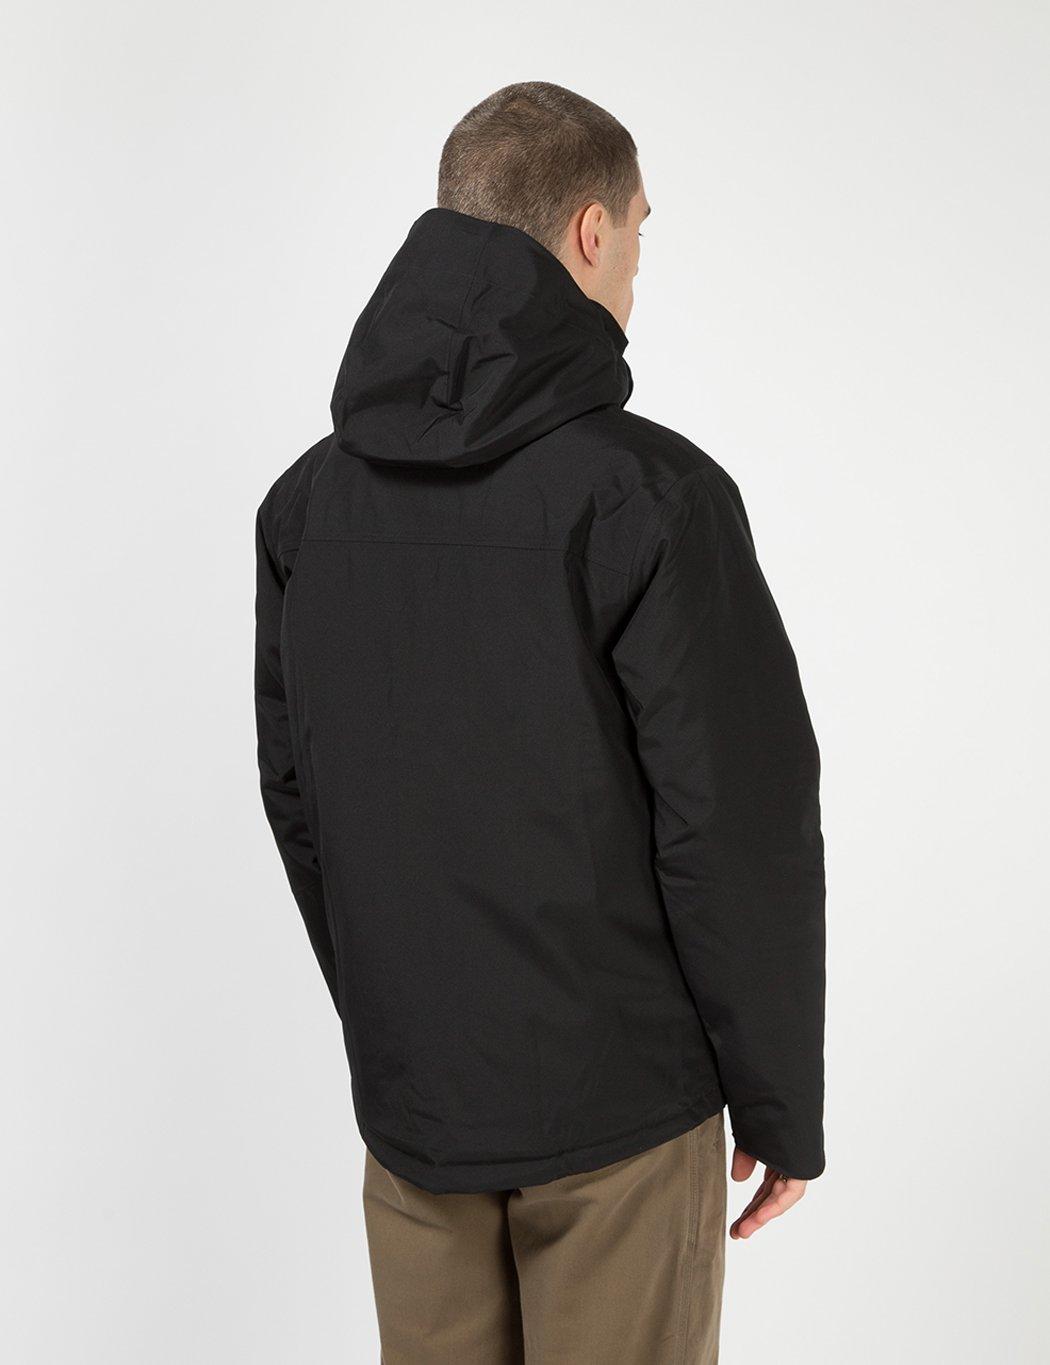 Patagonia Goose Topley Jacket in Black for Men - Save 8% - Lyst